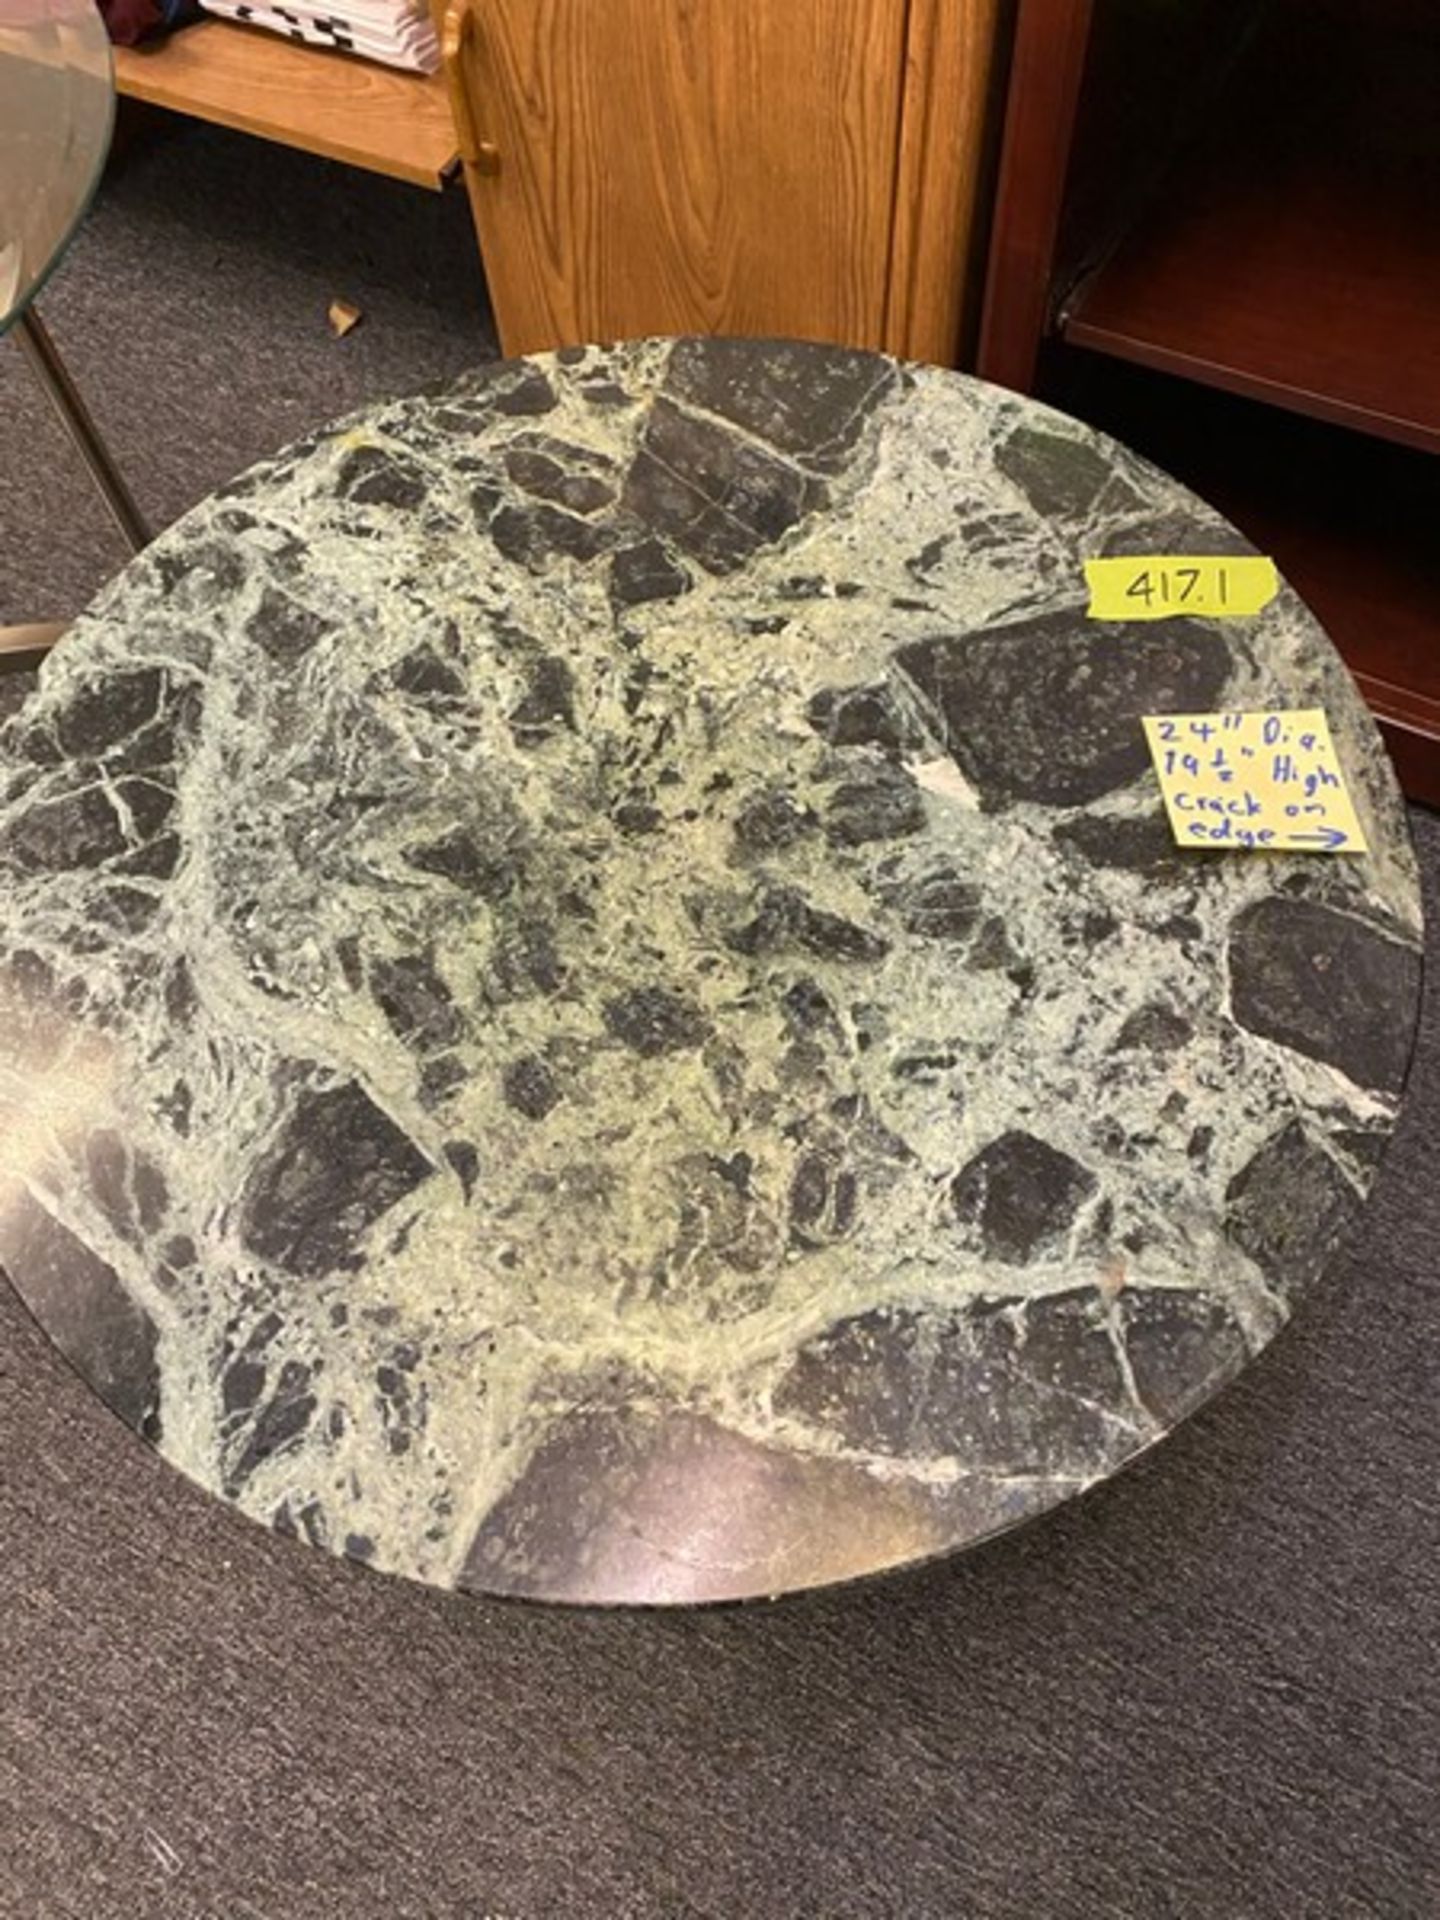 3 decorative round top end tables, one(1) granite top with hand-carved base - 24" diameter x 20"H - Image 8 of 10